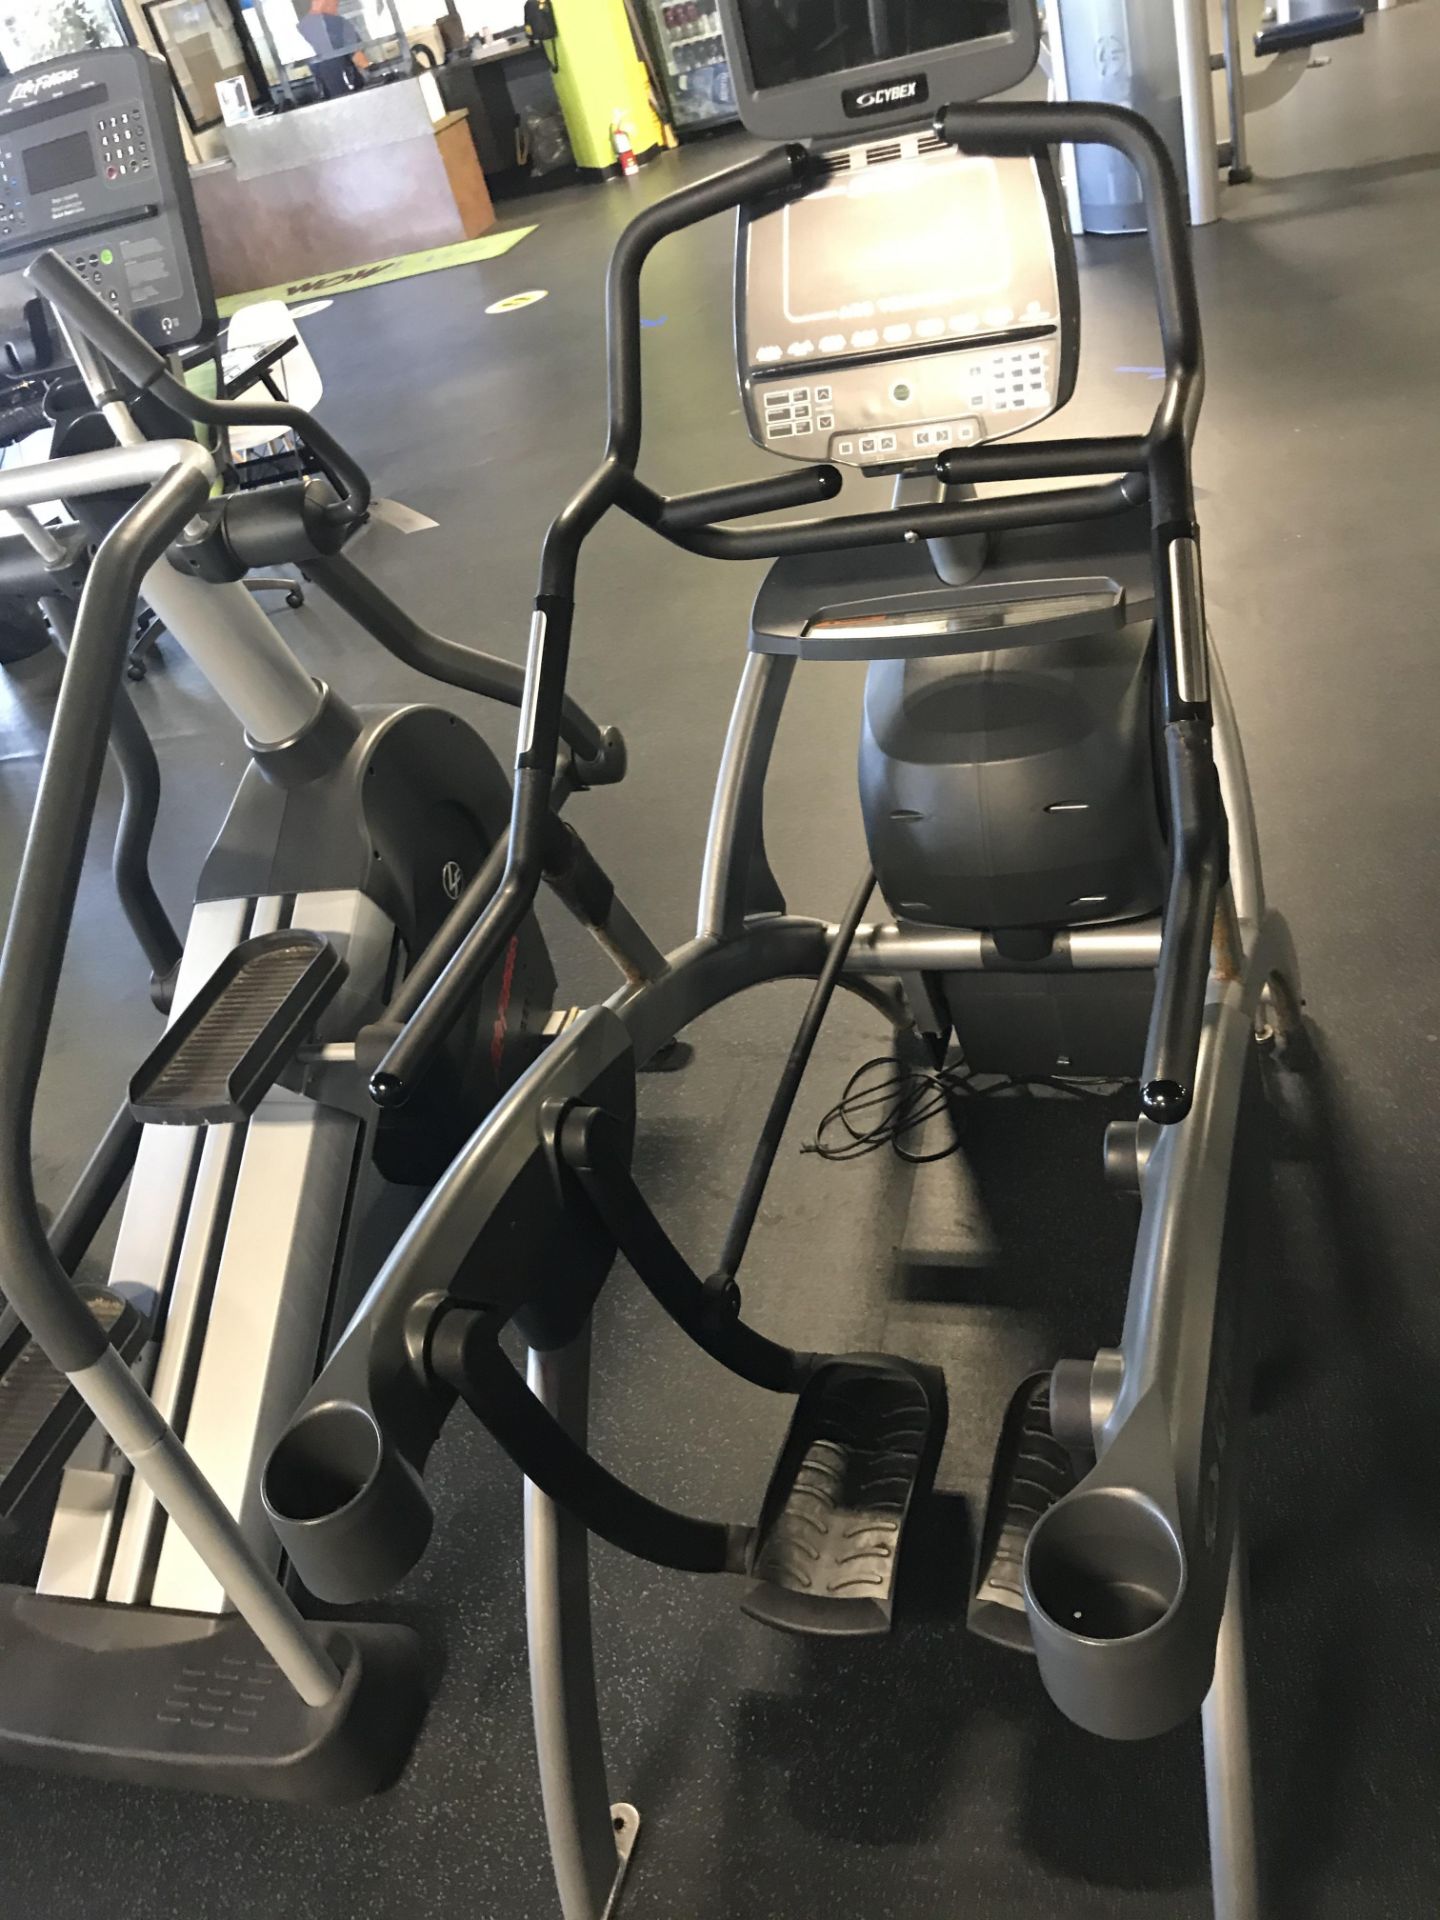 Cybex Arc Trainer #750A S/N: F01210750A90014B59 w/Programmable Controls, Digital Readout & TV - Image 2 of 2